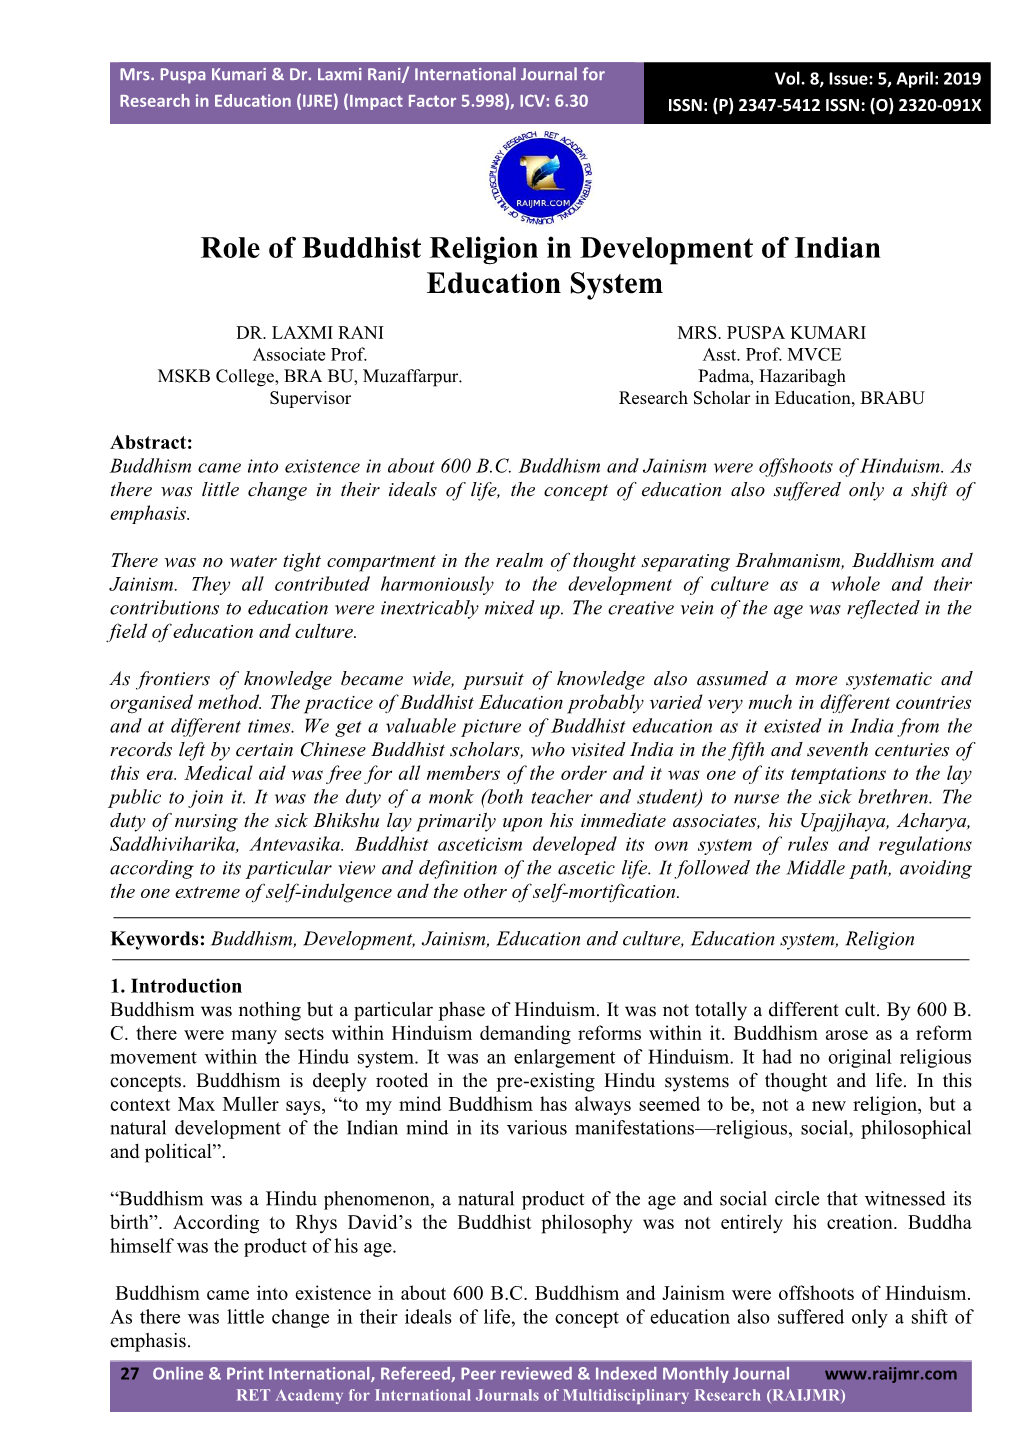 Role of Buddhist Religion in Development of Indian Education System